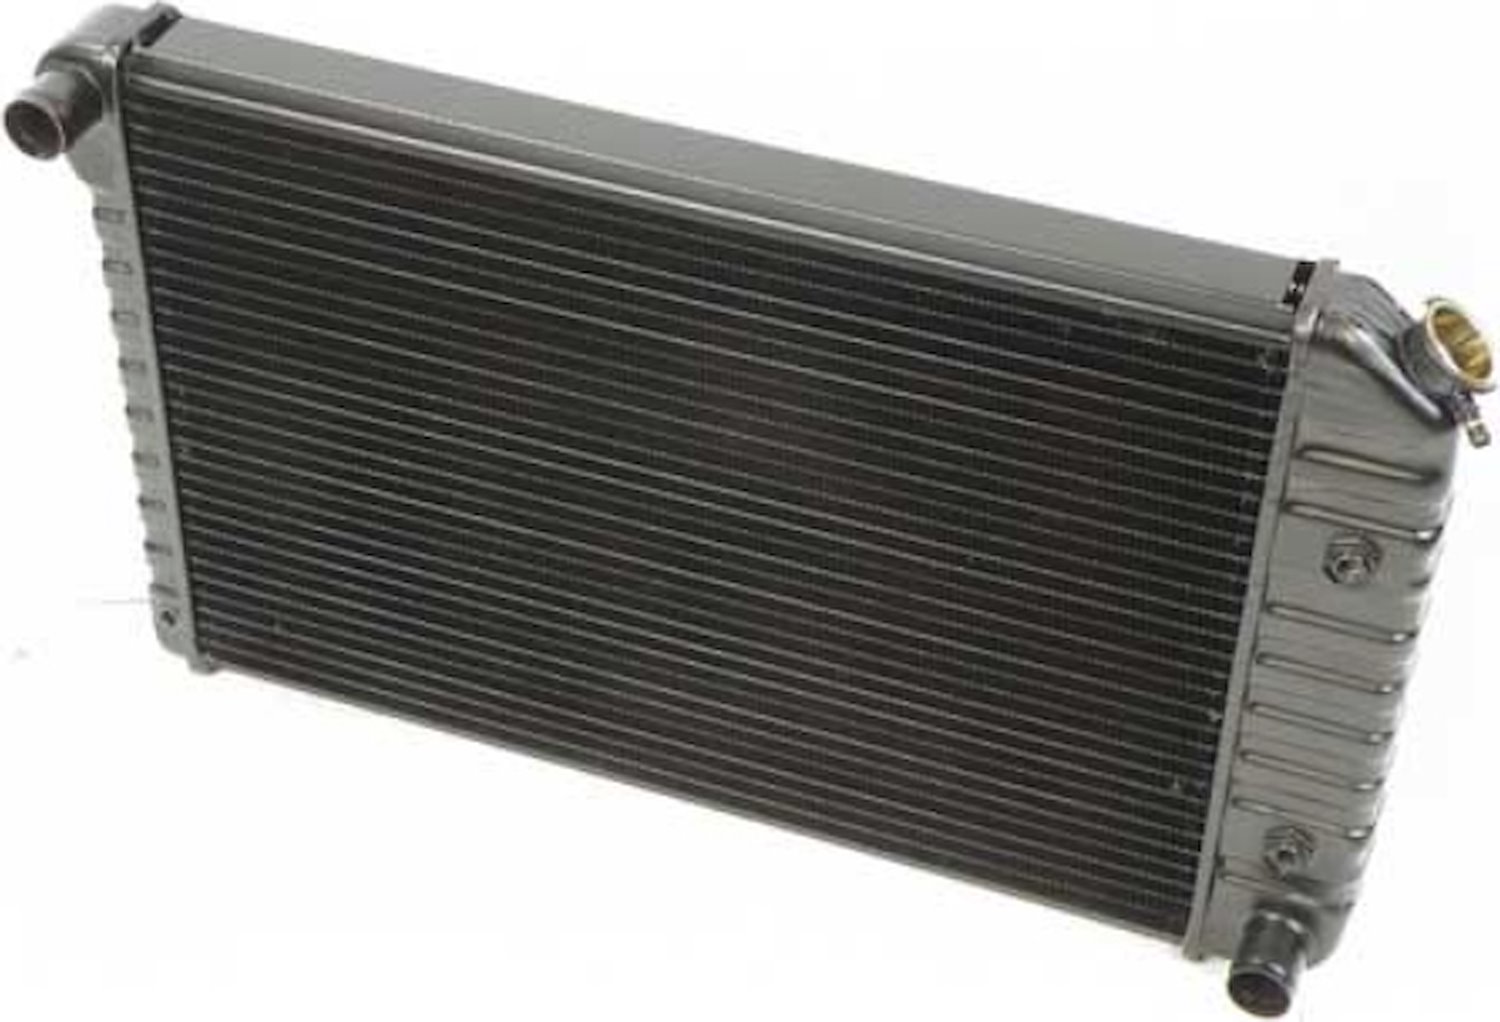 CRD94154A Radiator 1970-71 Camaro Small Block V8 With Automatic Trans 4 Row Copper/Brass